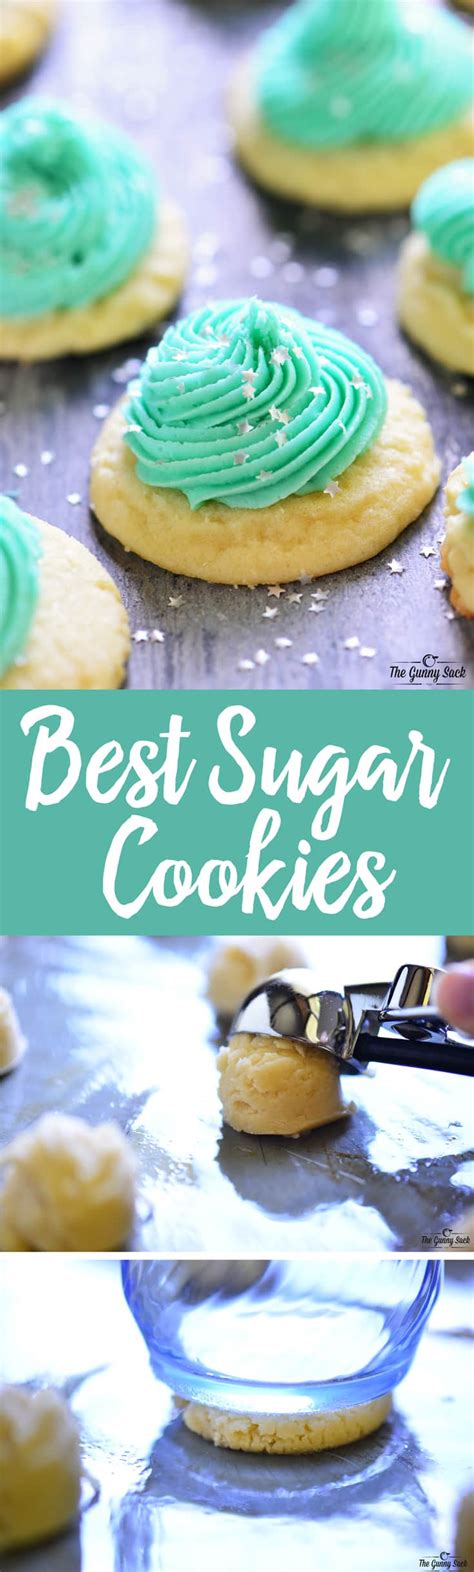 Place the 3/4 cup (149g) sugar in a large plastic bag, or in a shallow pan. Best Sugar Cookie Recipe - The Gunny Sack